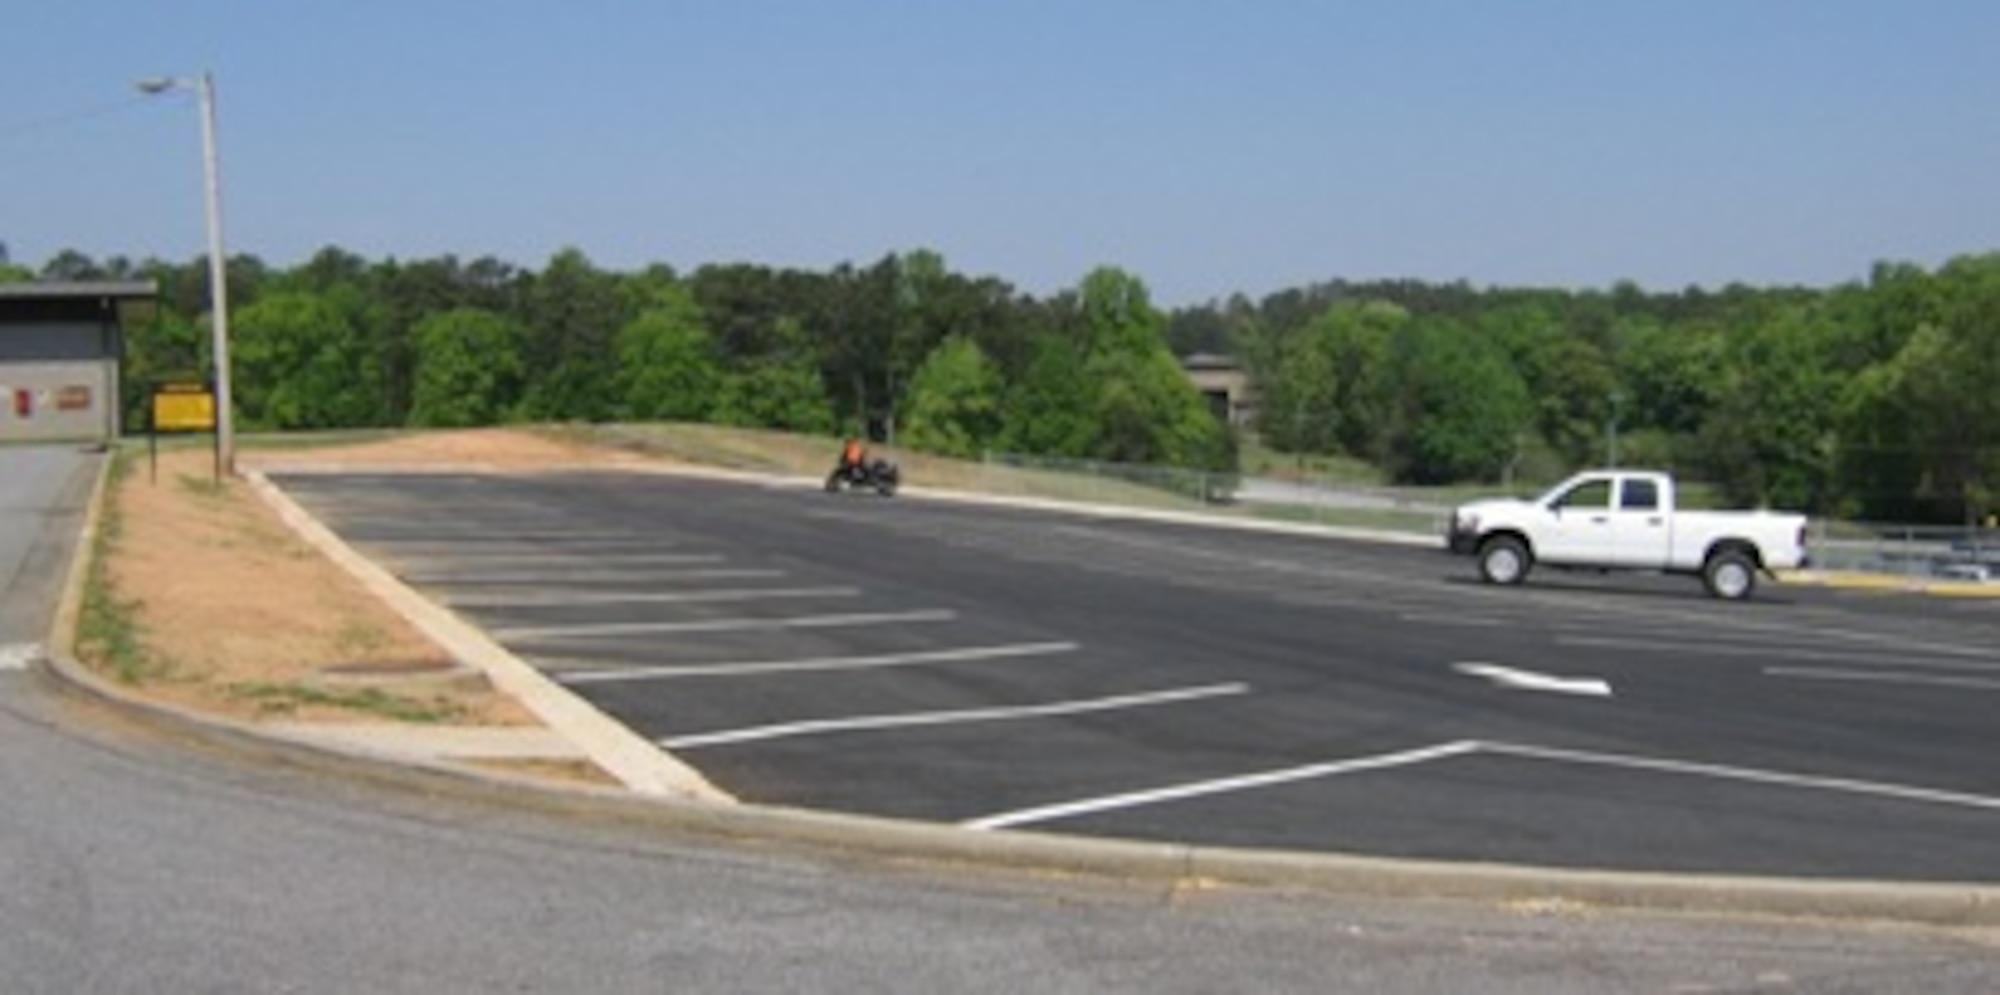 A new parking lot was recently completed for personnel assigned to the Base Fire Station (B745), C-130 Inspection Dock Hanger (B746), and Transportation Proficiency Center (B747). The new asphalt paved parking lot provides 45 additional parking spaces. 